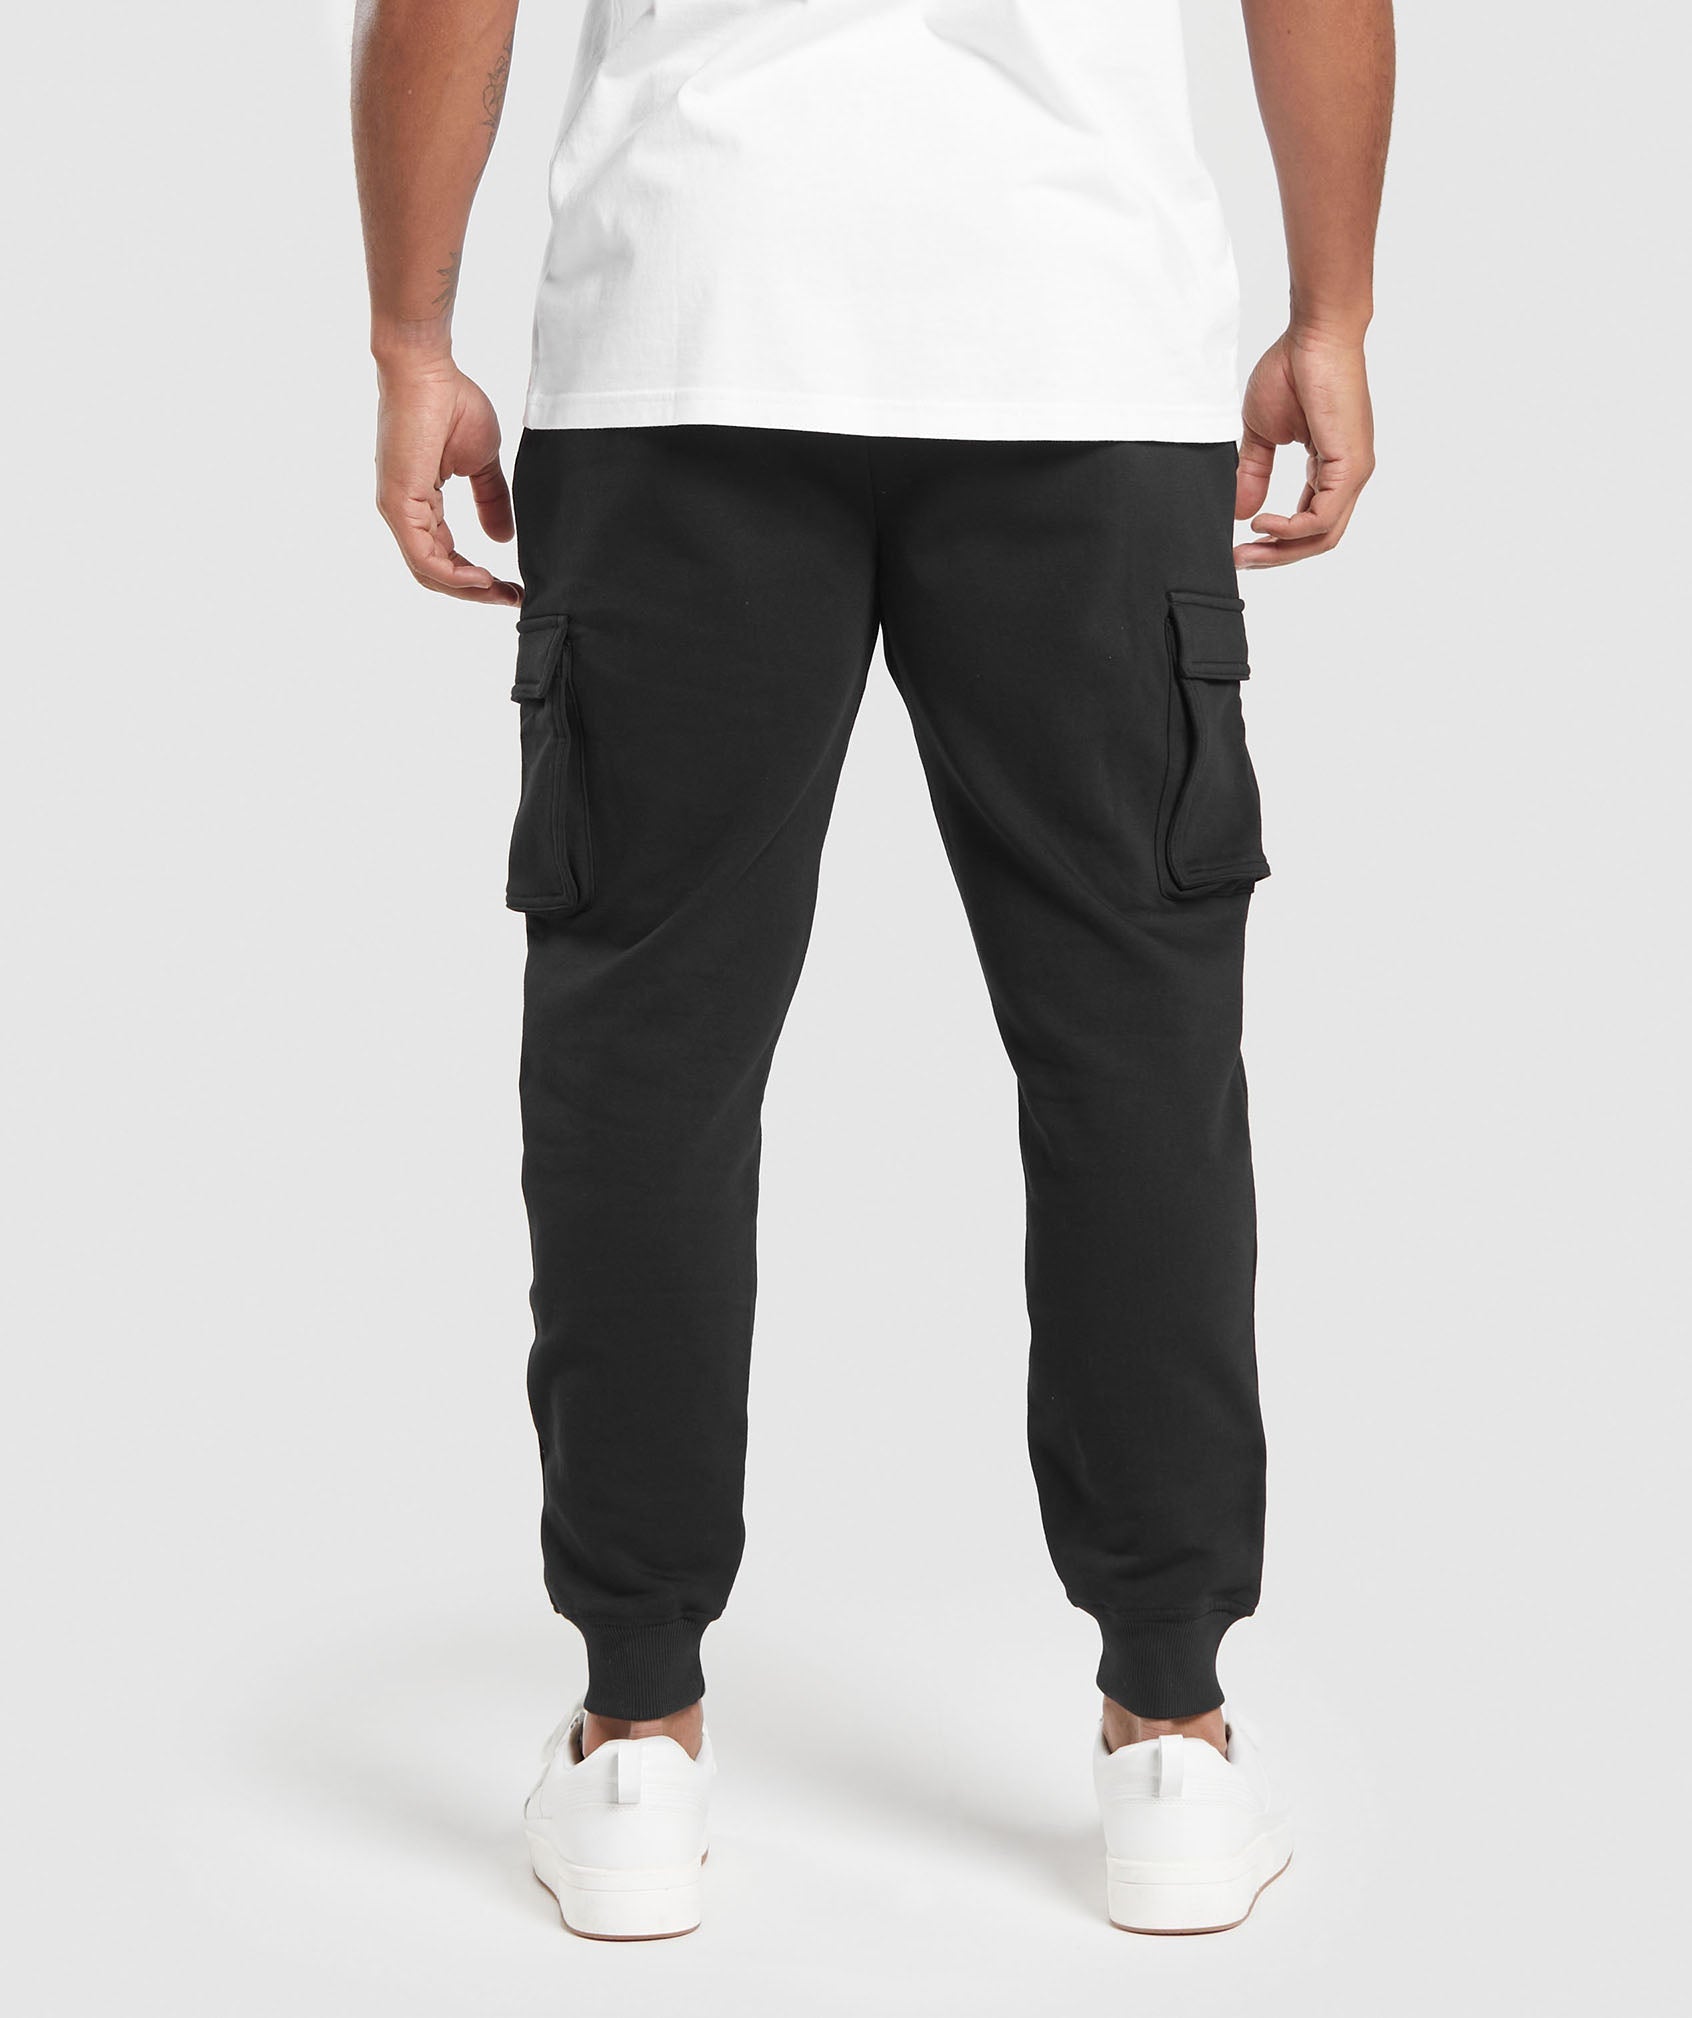 Crest Cargo Joggers in Black - view 3